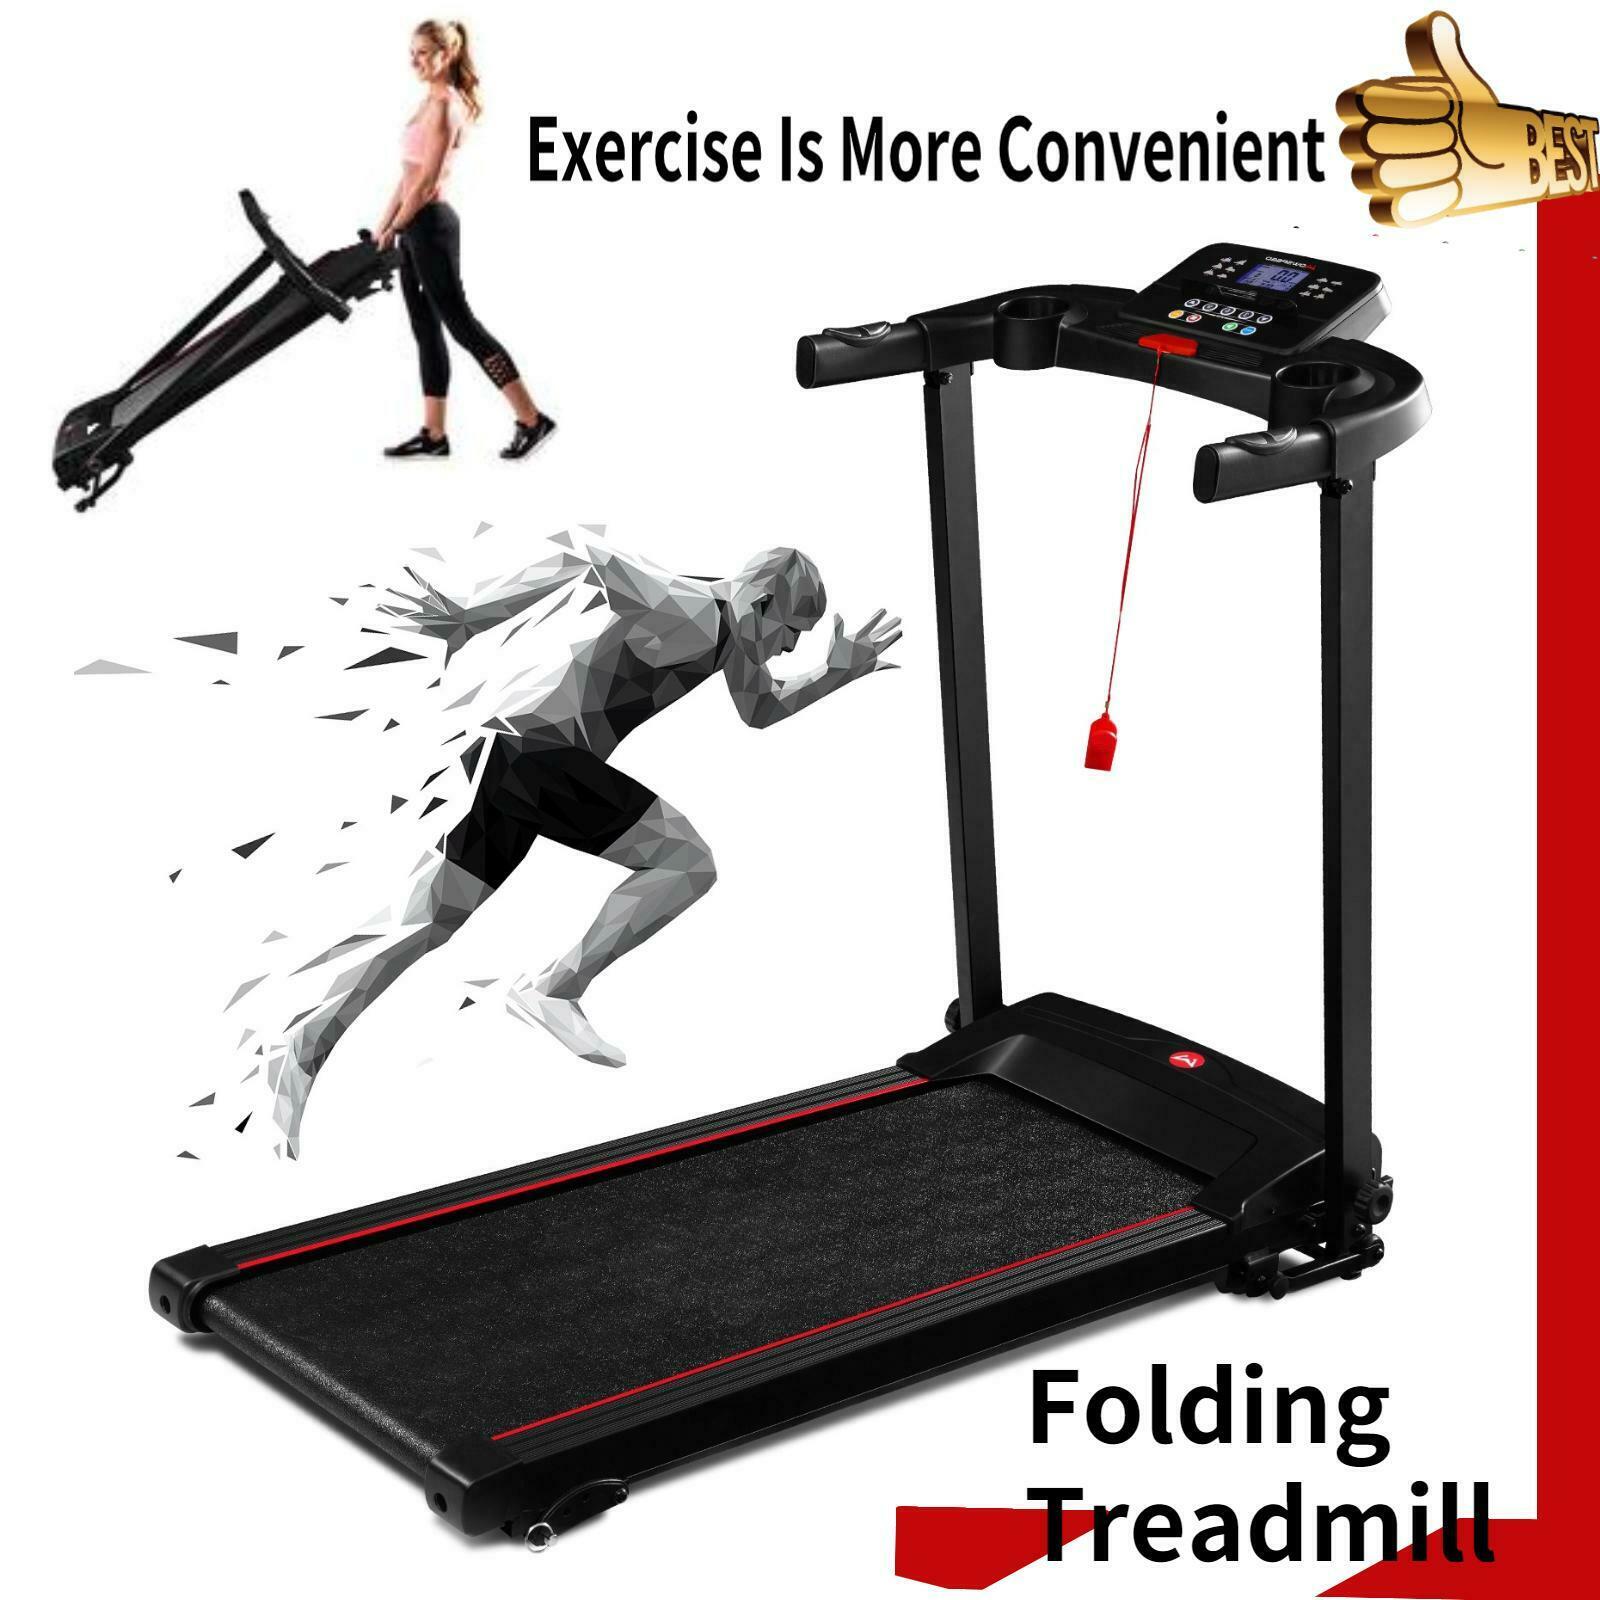 Folding Treadmill 2.0 Hp Electric Motorized Running Fitness Machine Home Office